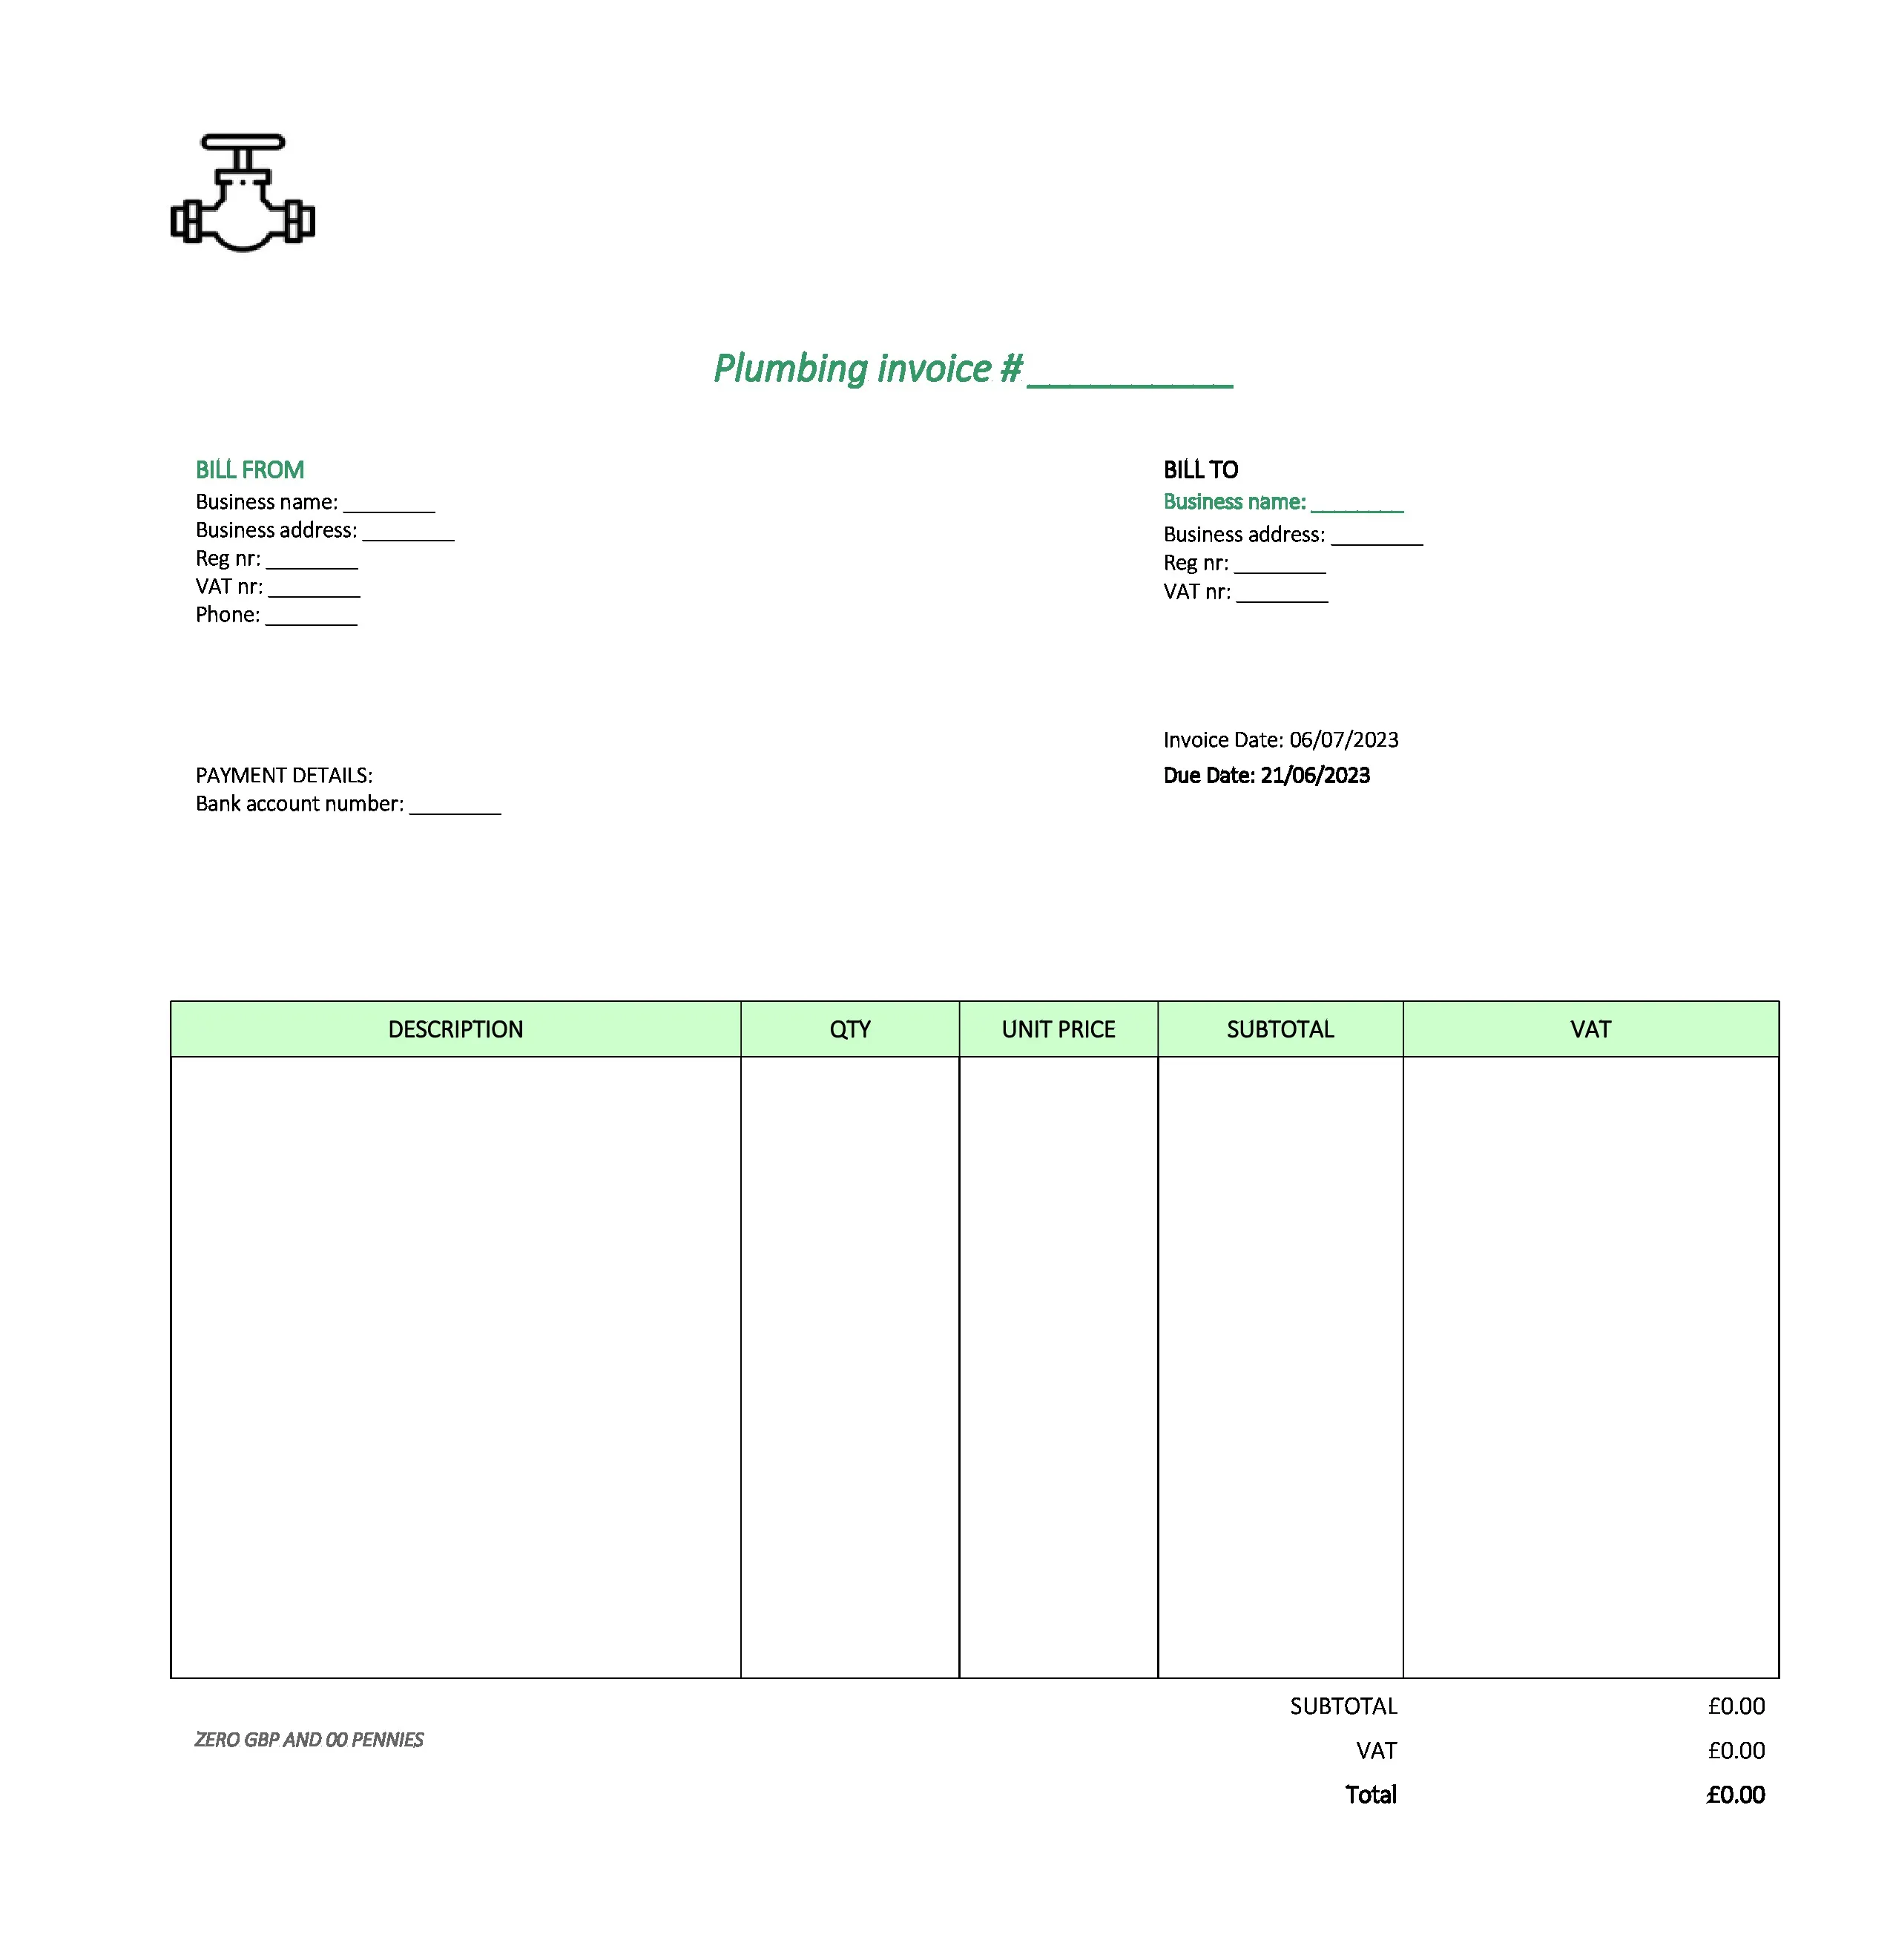 with logo plumbing invoice template UK Excel / Google sheets